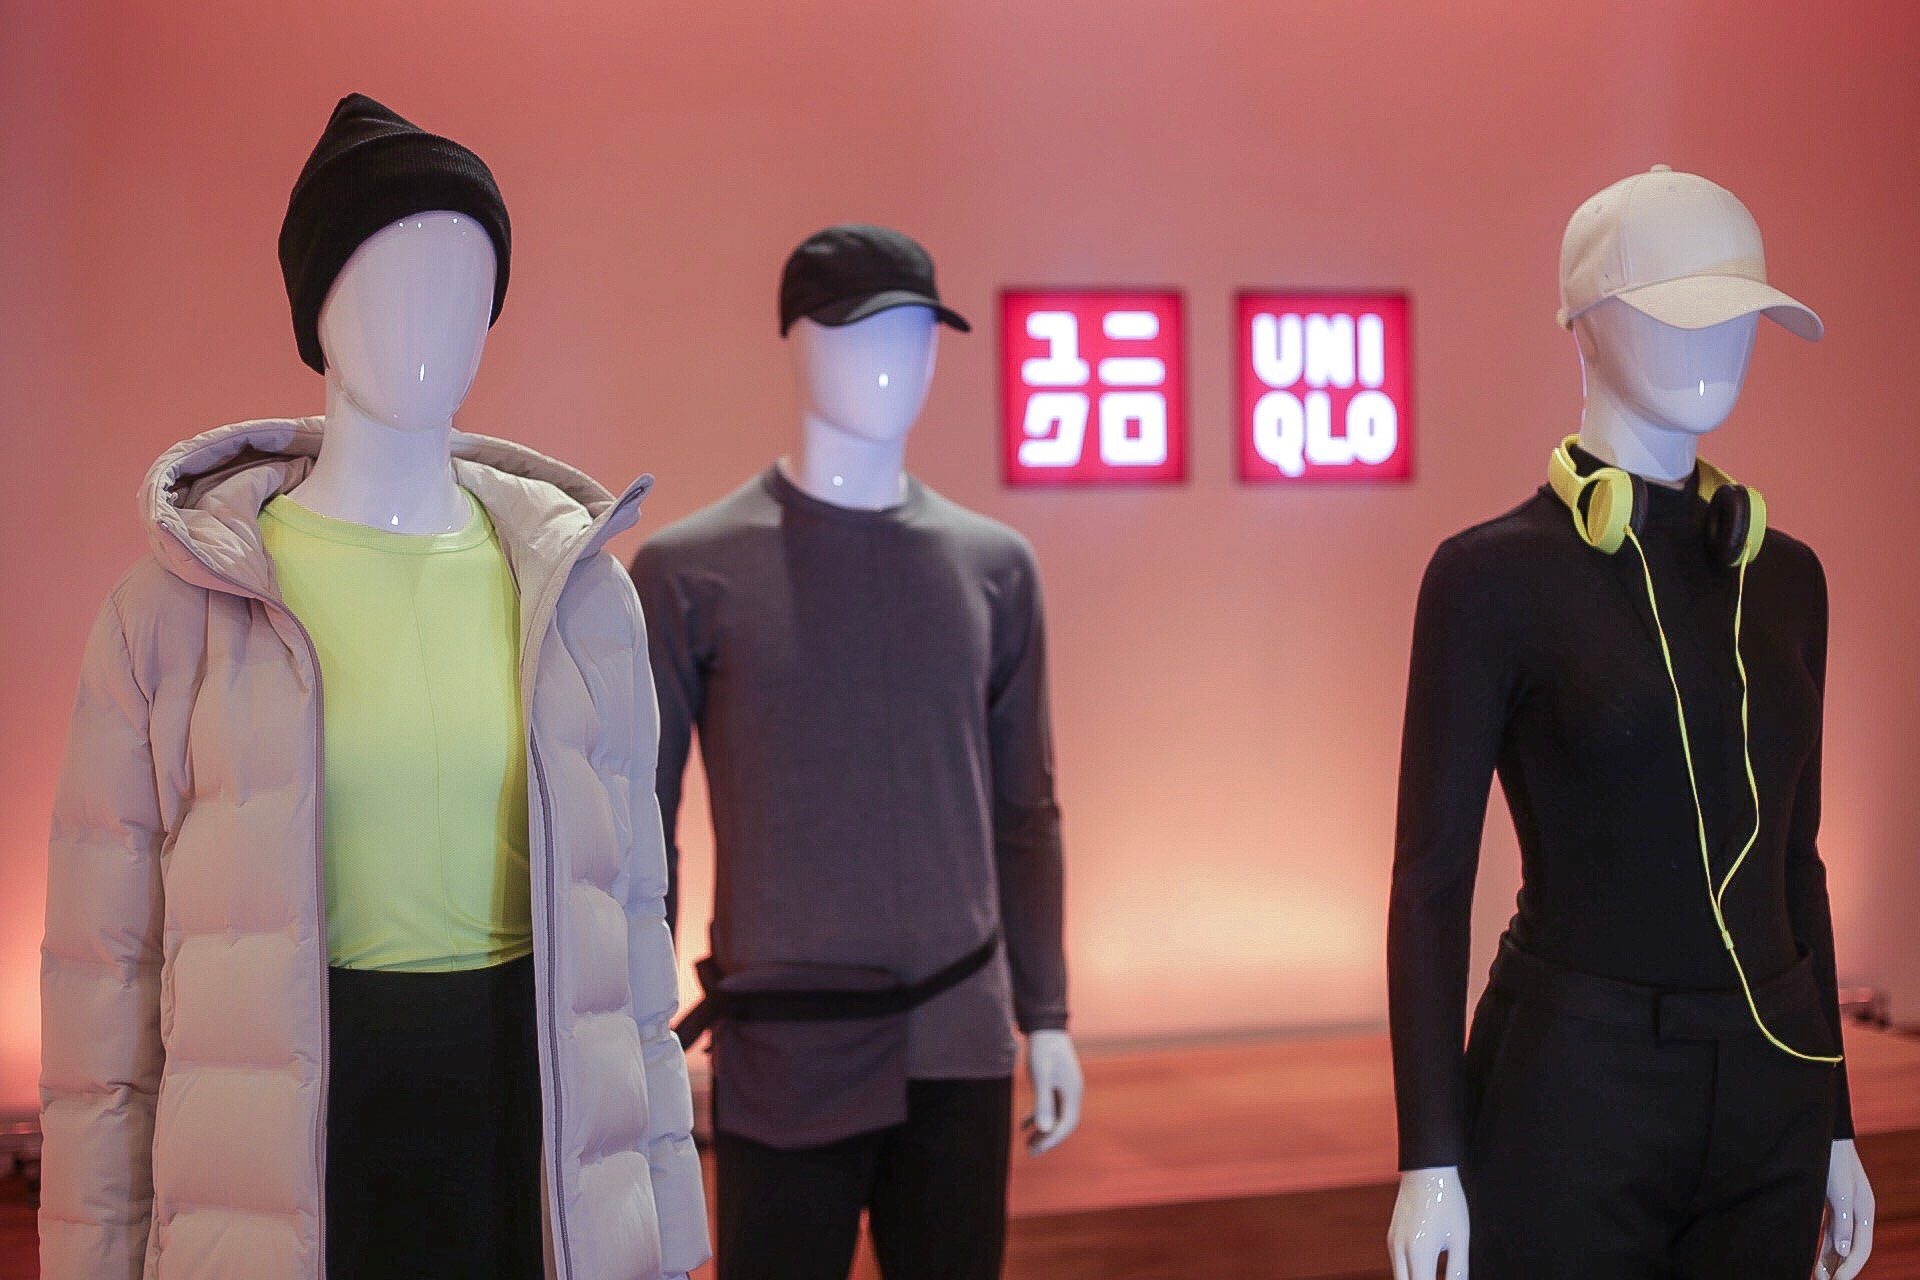 Photos and prices: Alexander Wang x Uniqlo’s Heattech collection